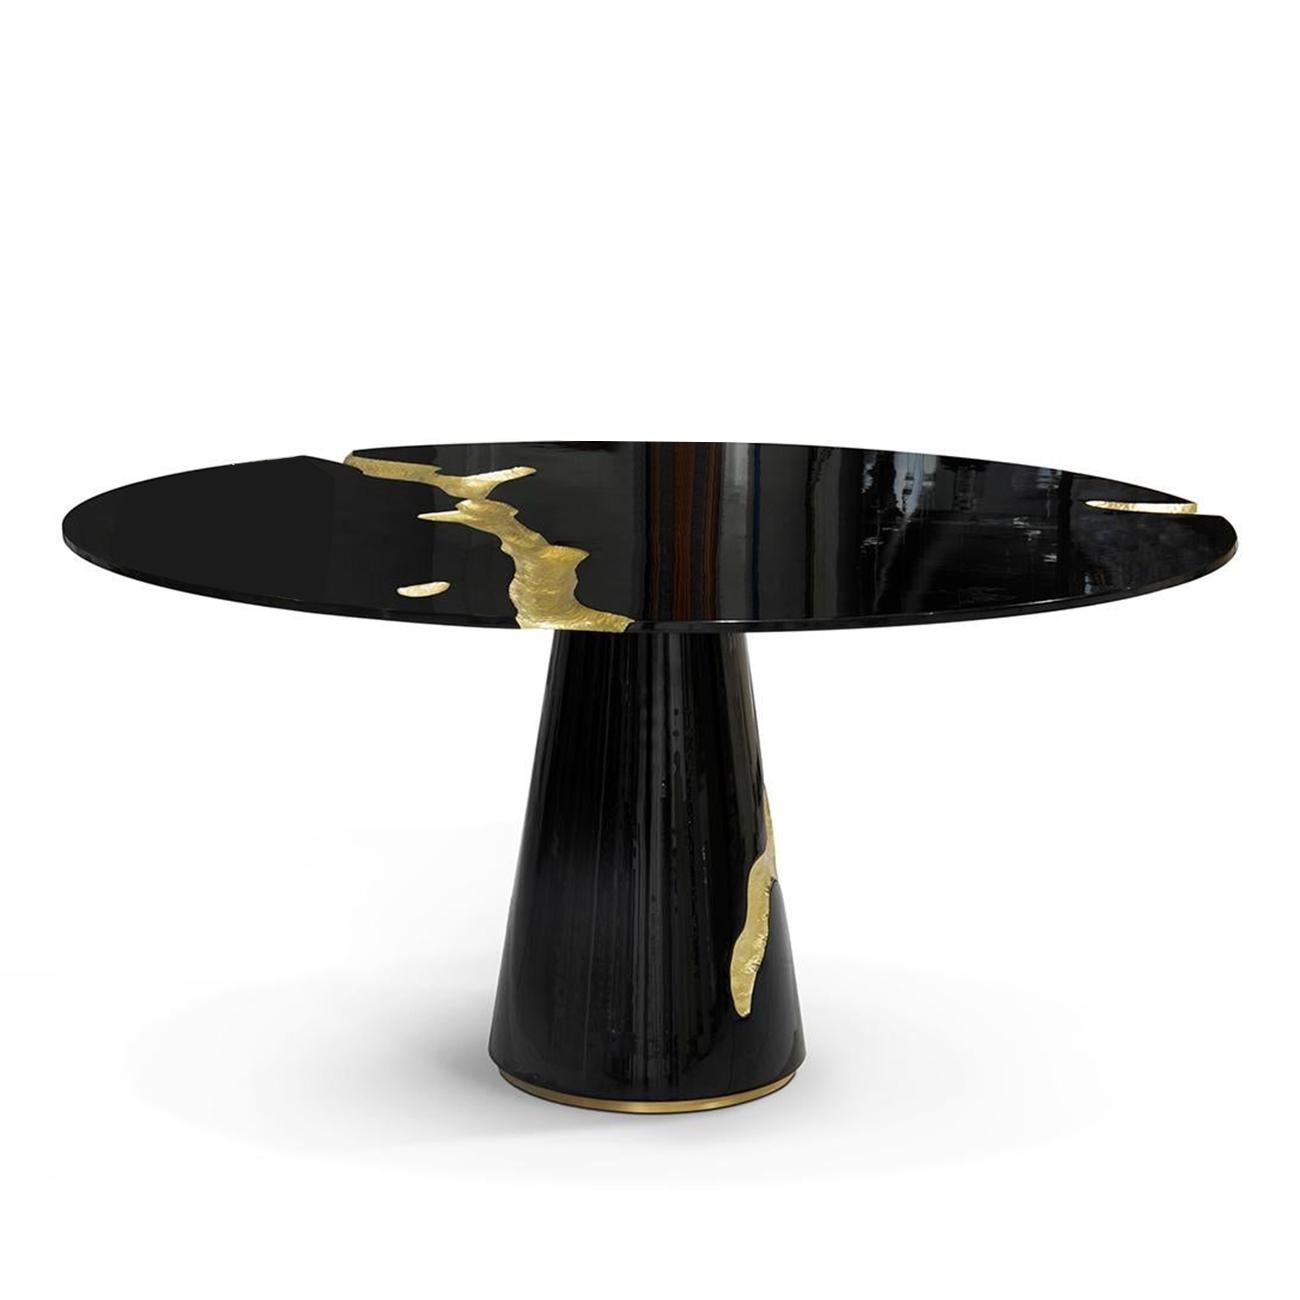 Dining table majestic round black made with mahogany wood
in black lacquered finish. Top and base includes hand carved 
parts decorated with hand-crafted polished brass leaves.
Also available in white lacquered finish.
 